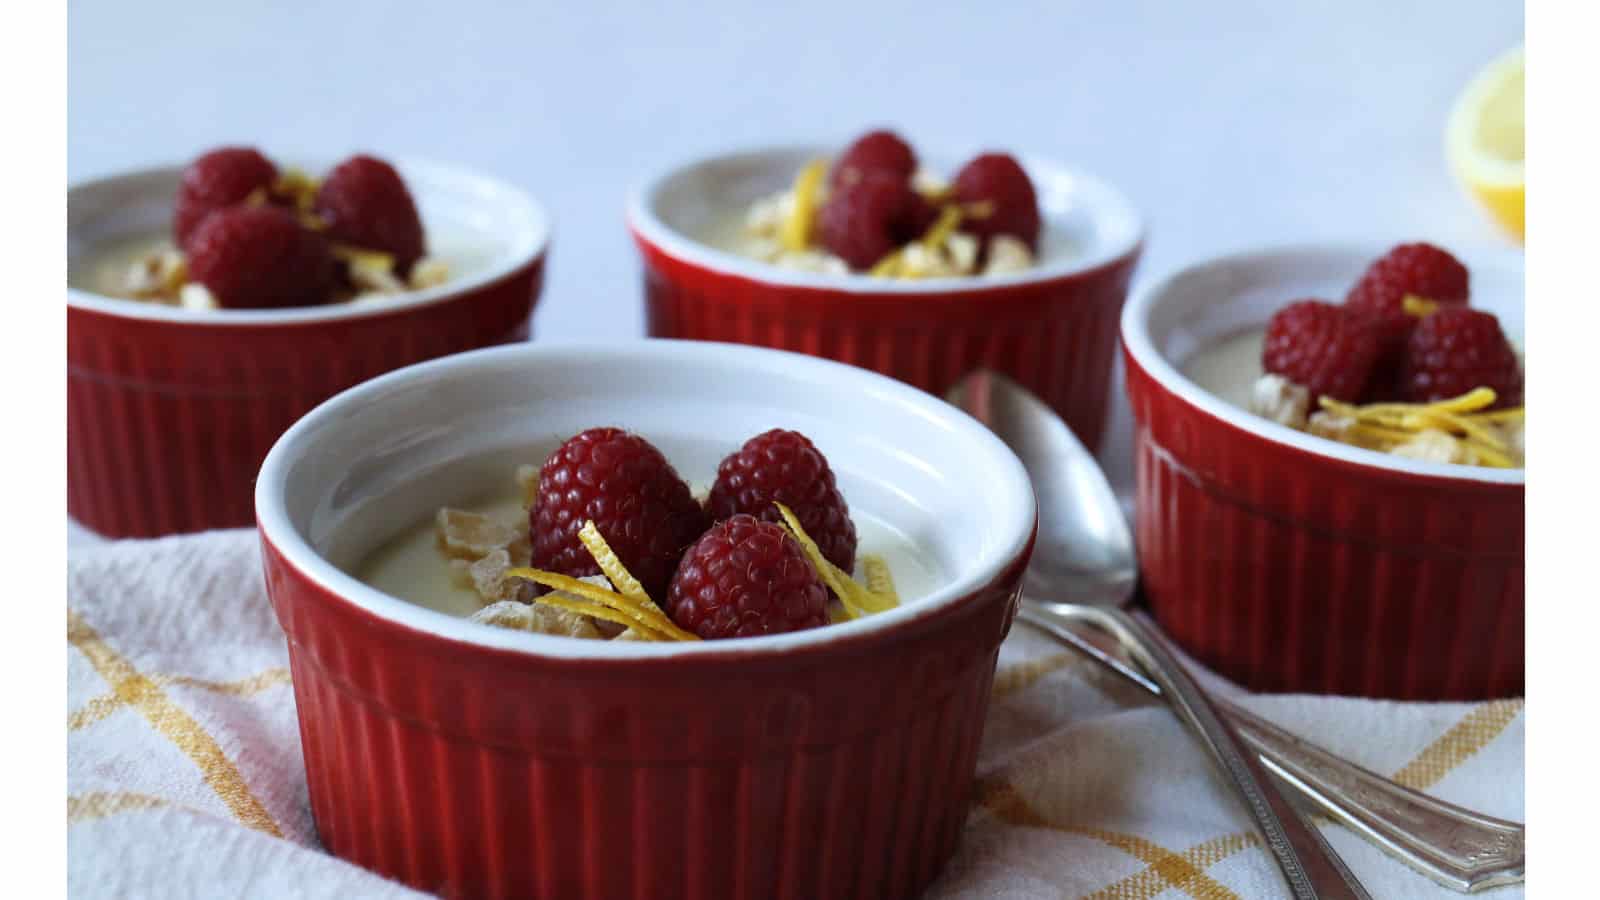 Lemon posset in red ramekins on a yellow and white towel.